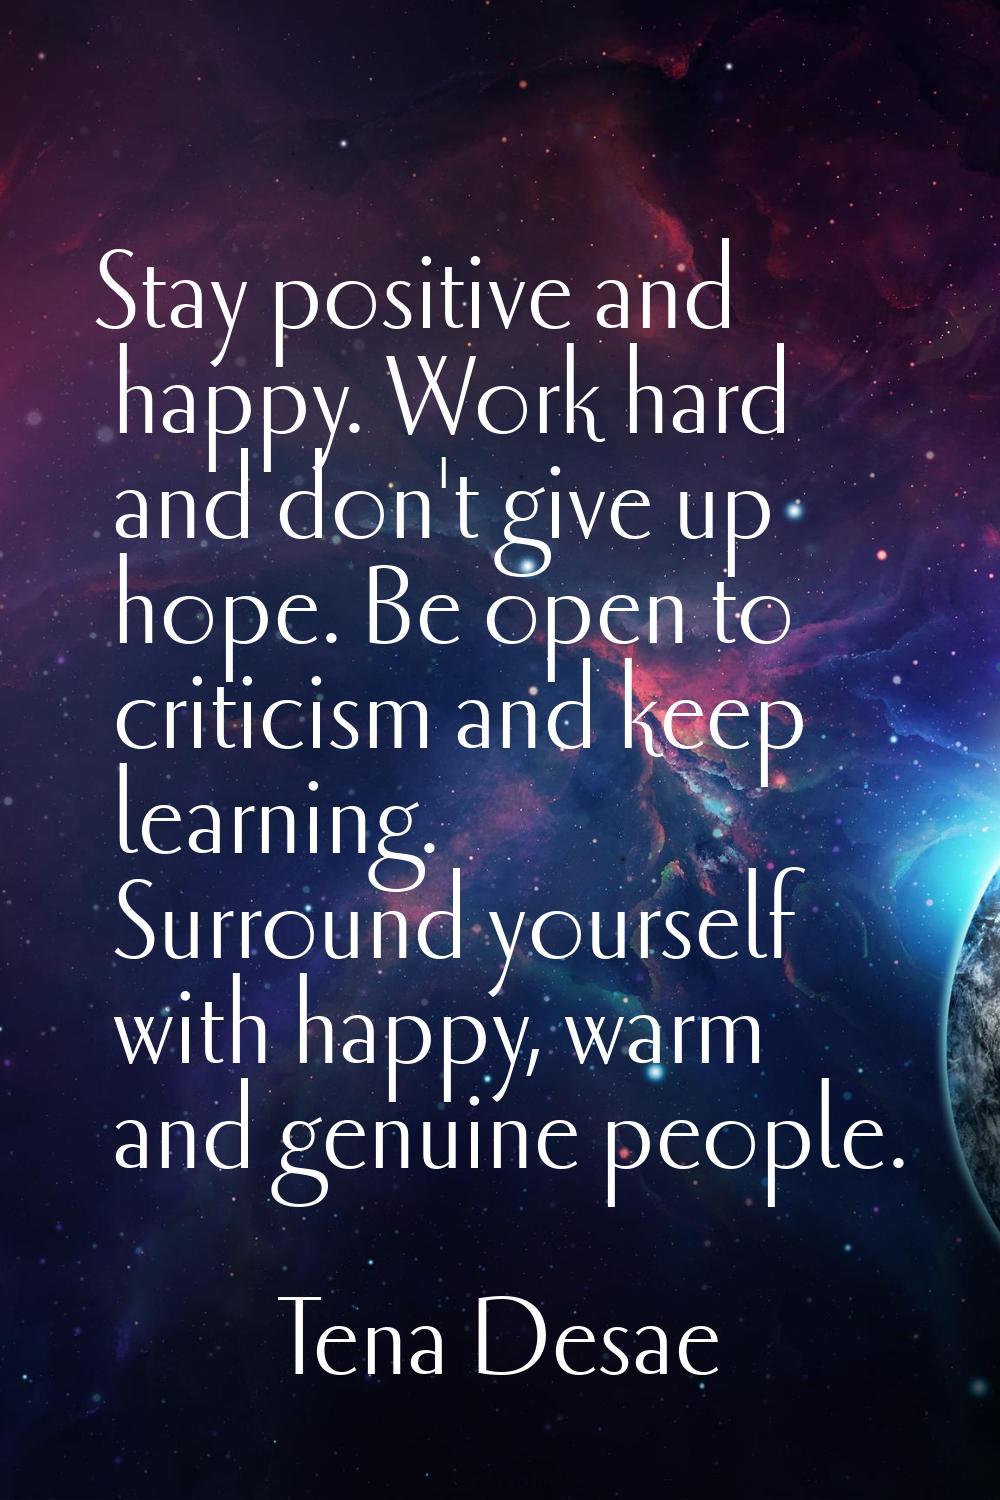 Stay positive and happy. Work hard and don't give up hope. Be open to criticism and keep learning. 